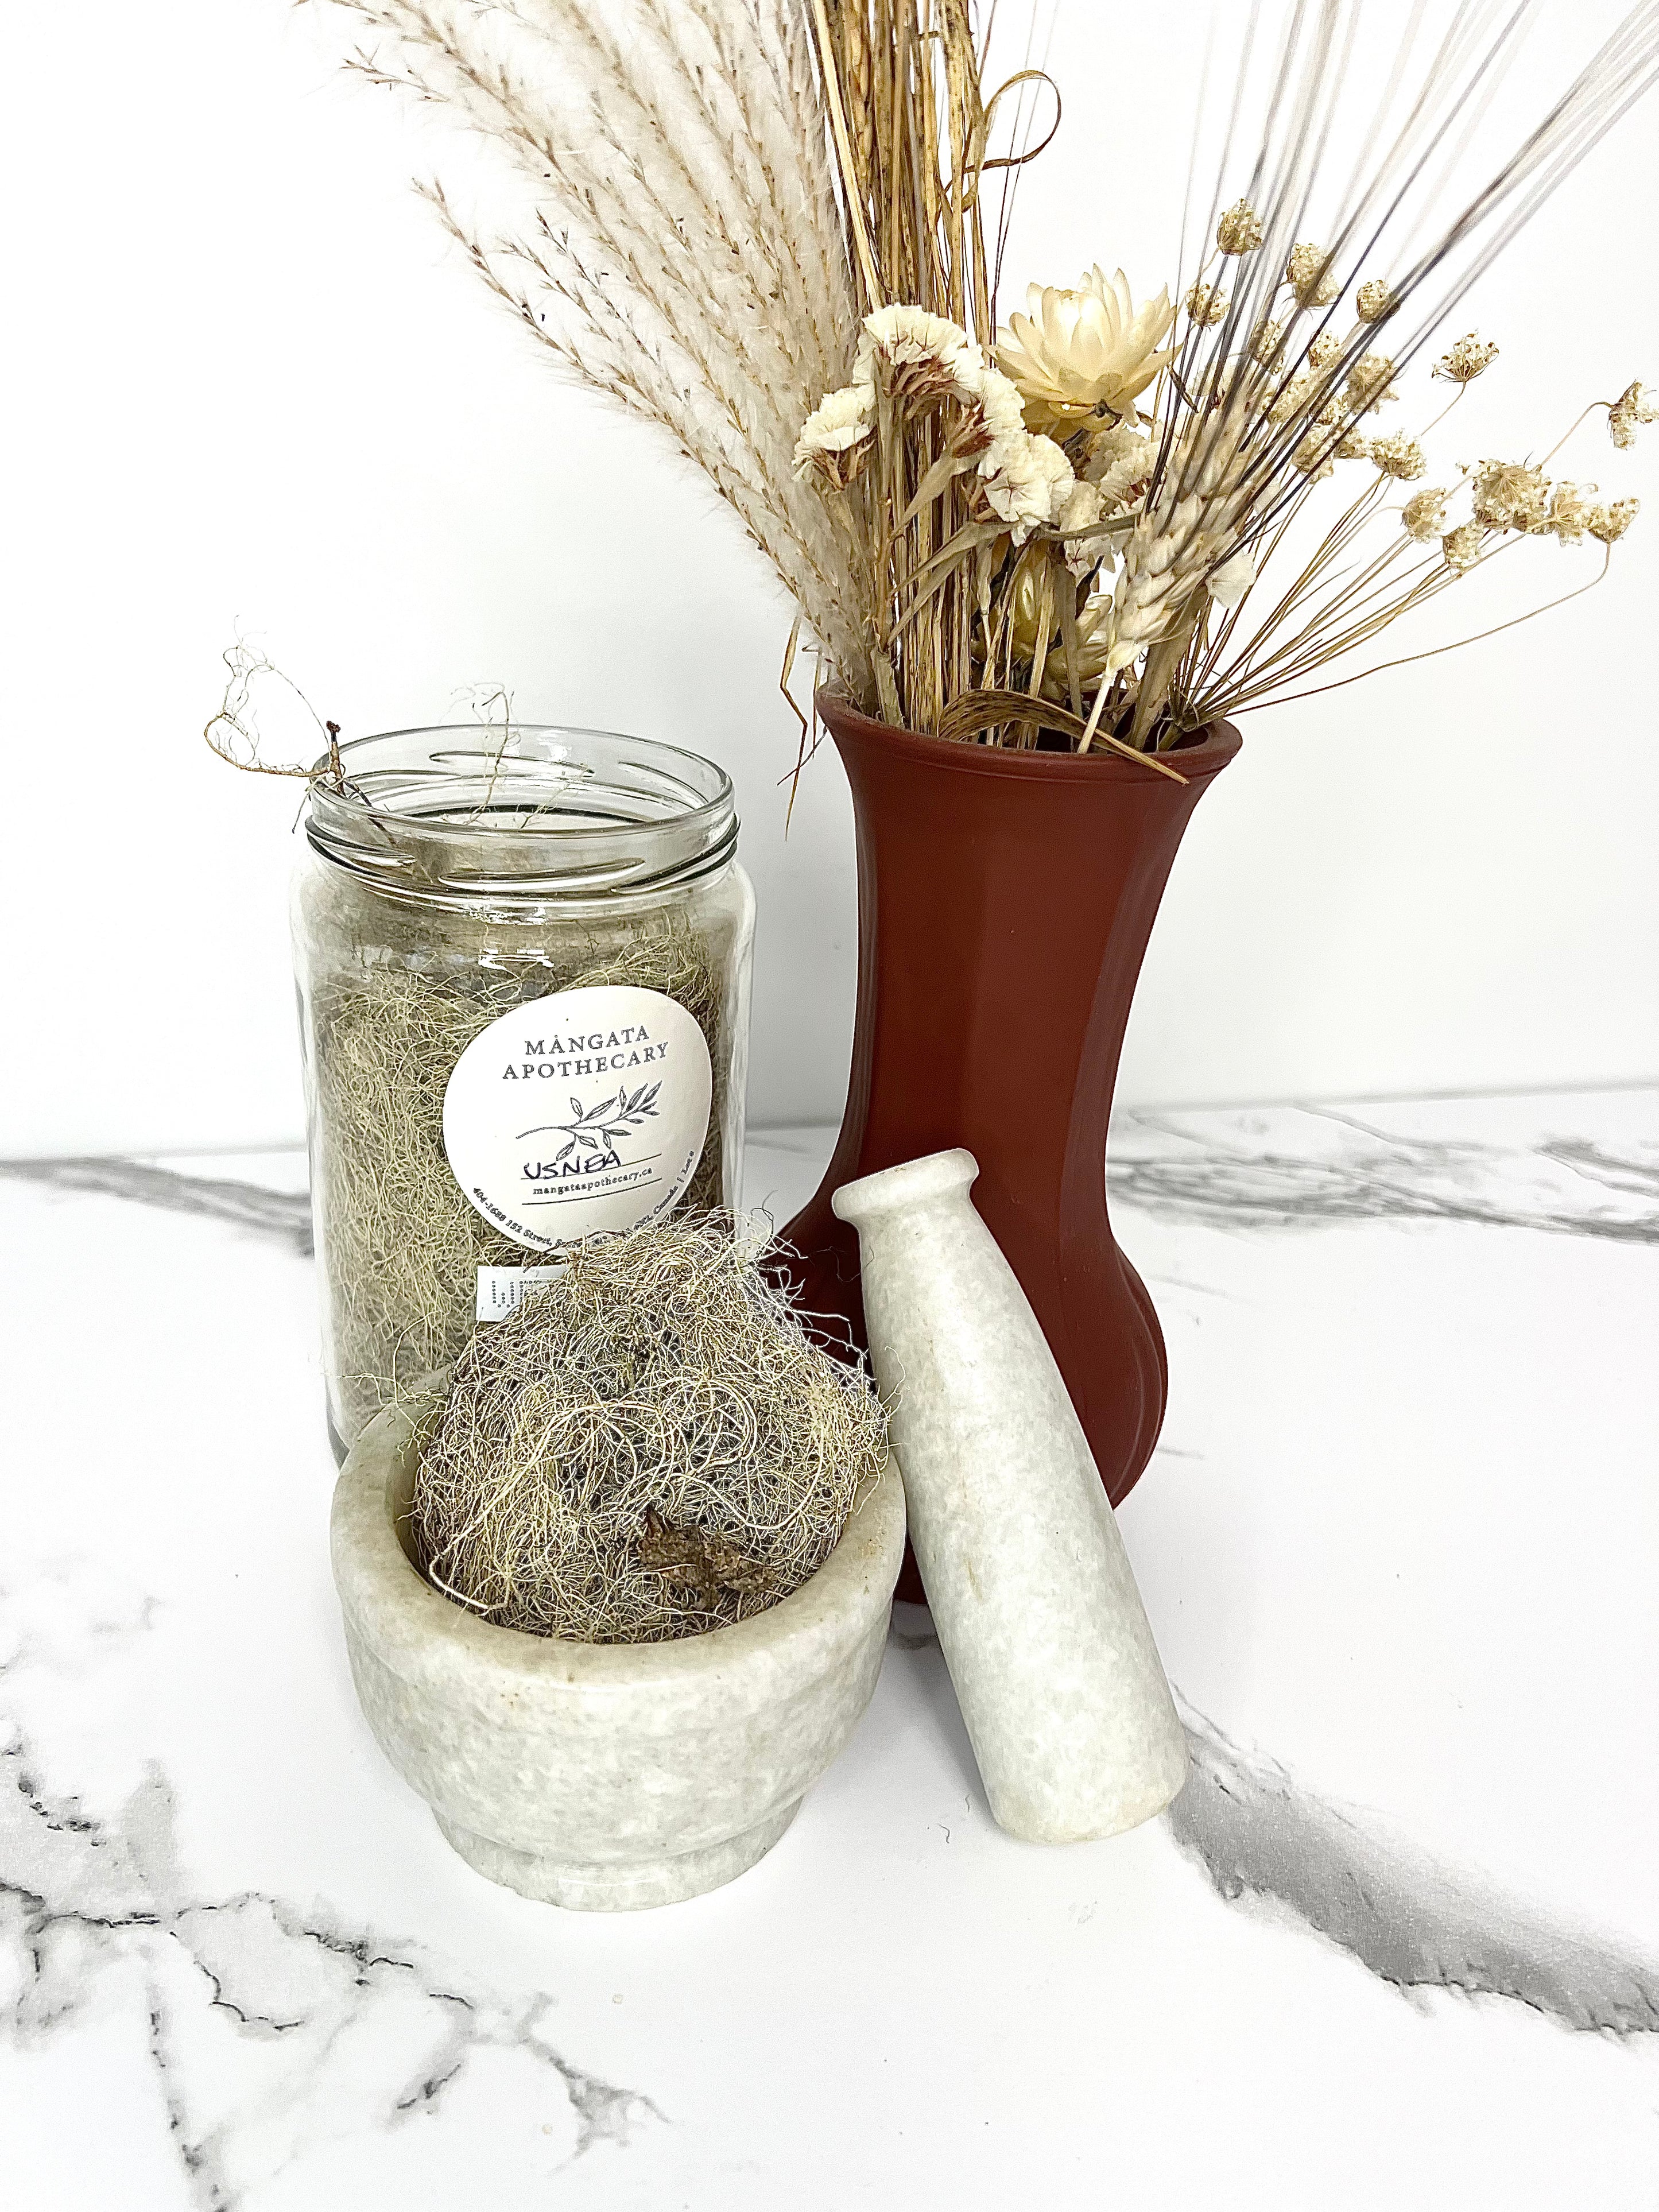 Usnea Herb Benefits - Product Image